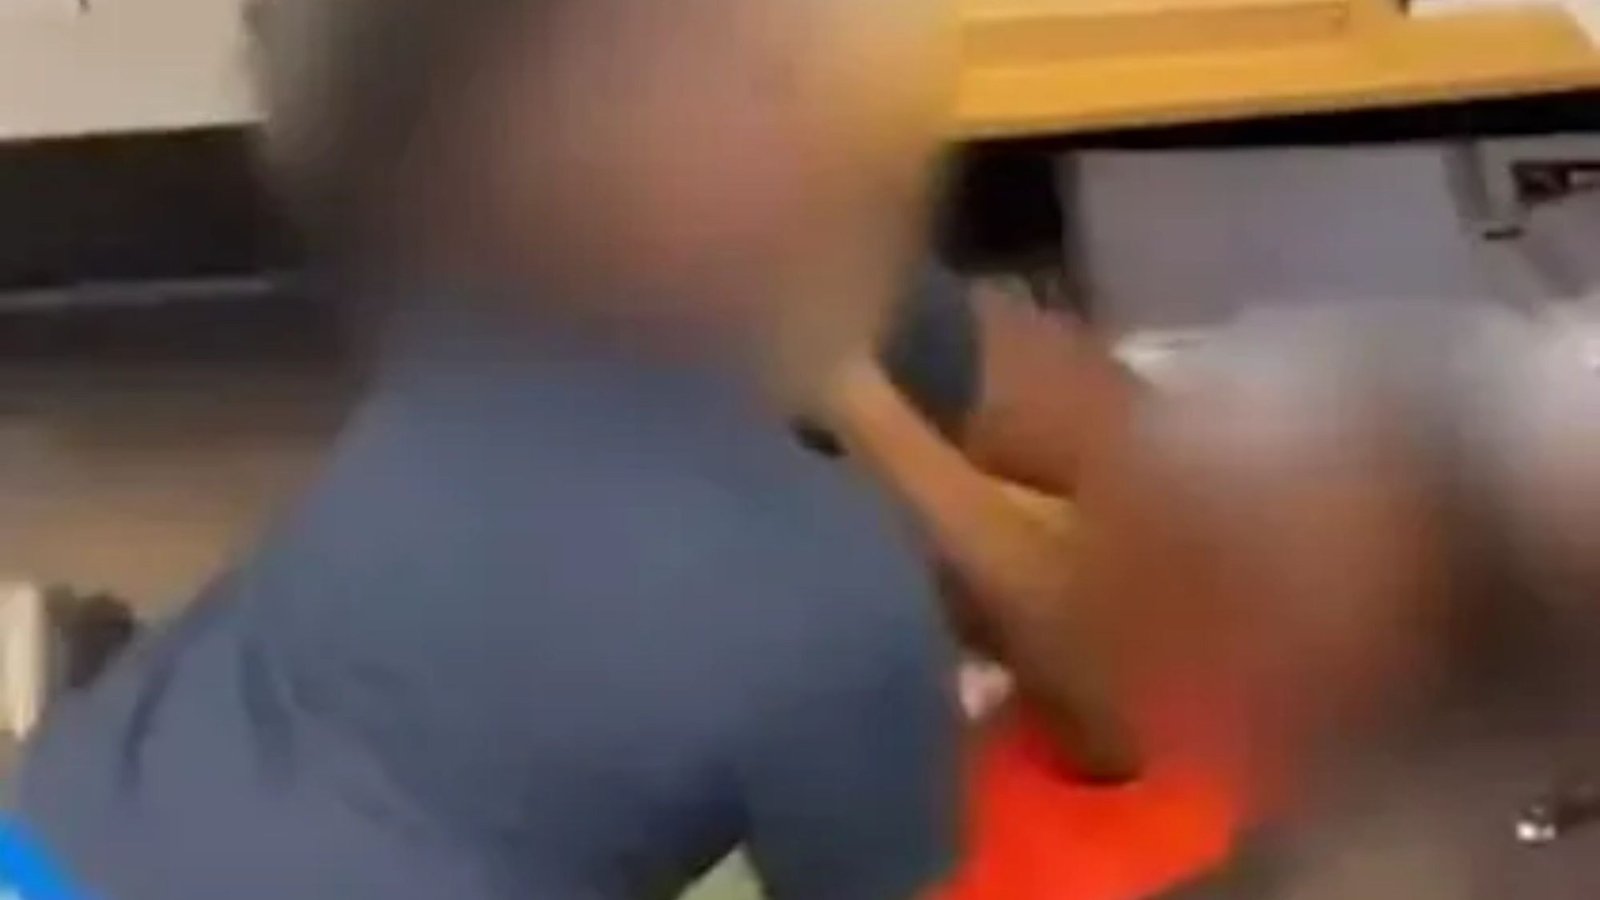 Shock video shows primary school FIGHT CLUB organised by teacher who encouraged pupils to brawl on camera